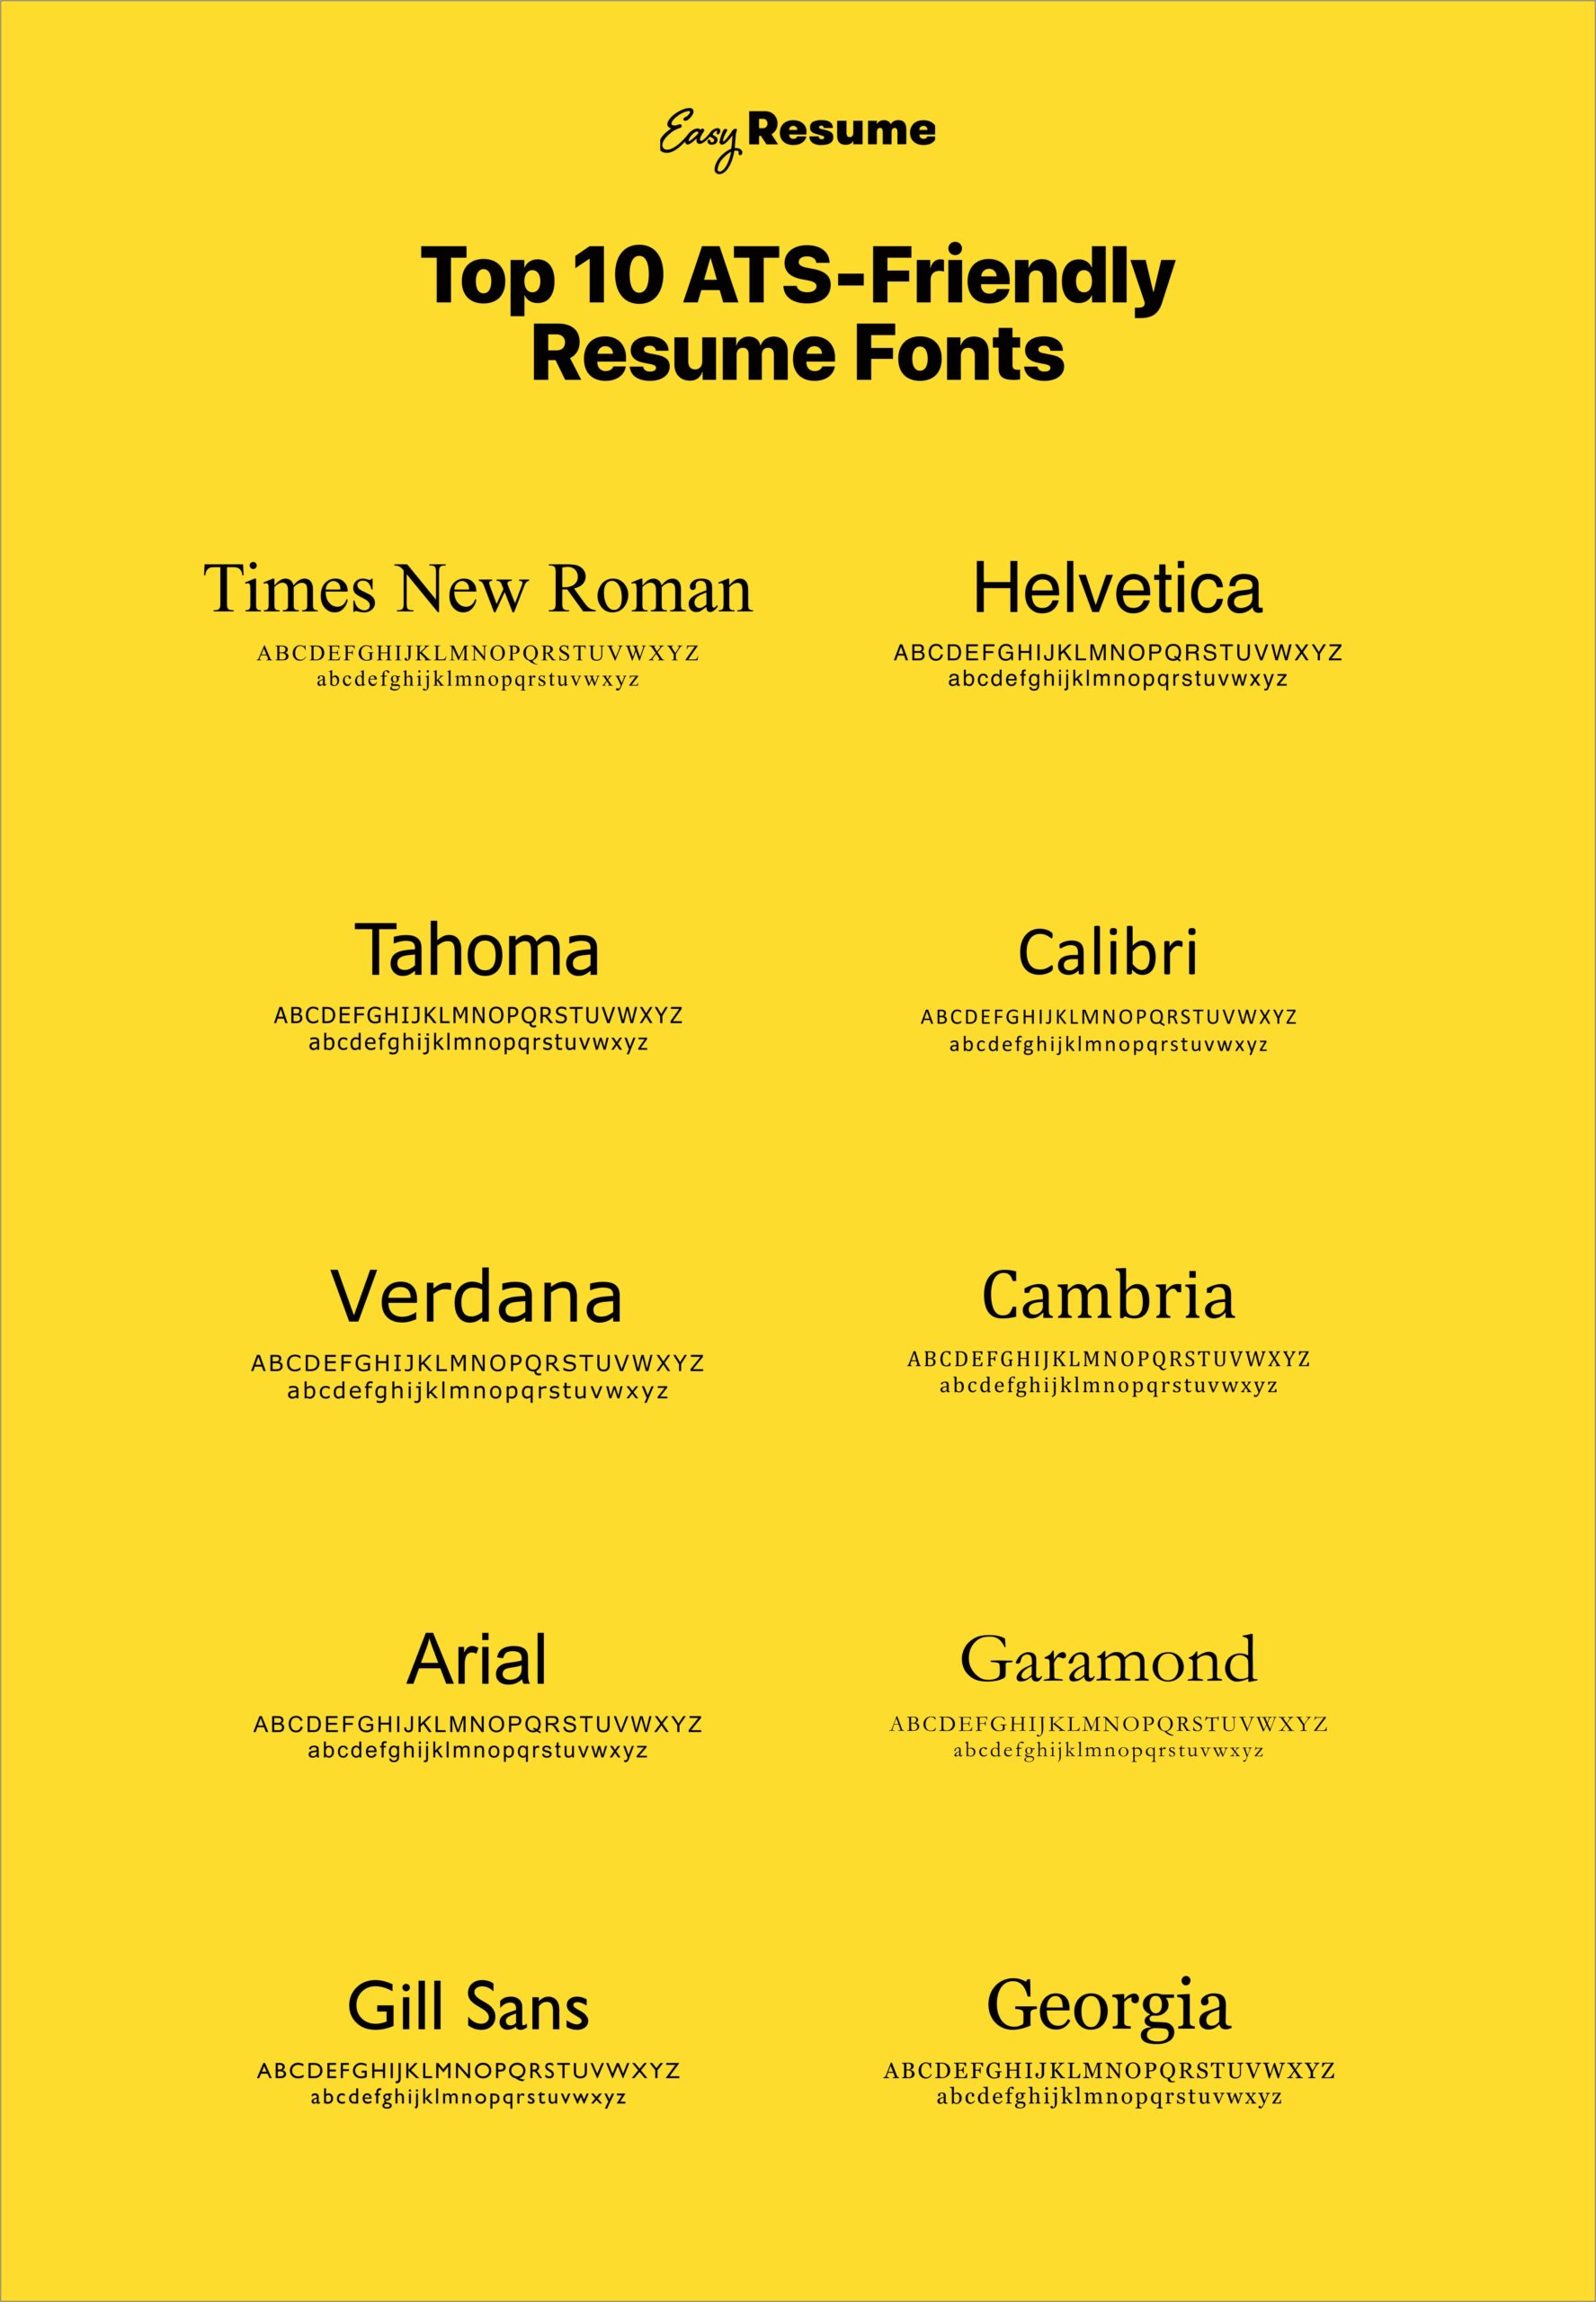 Is Times New Roman Good For Resume